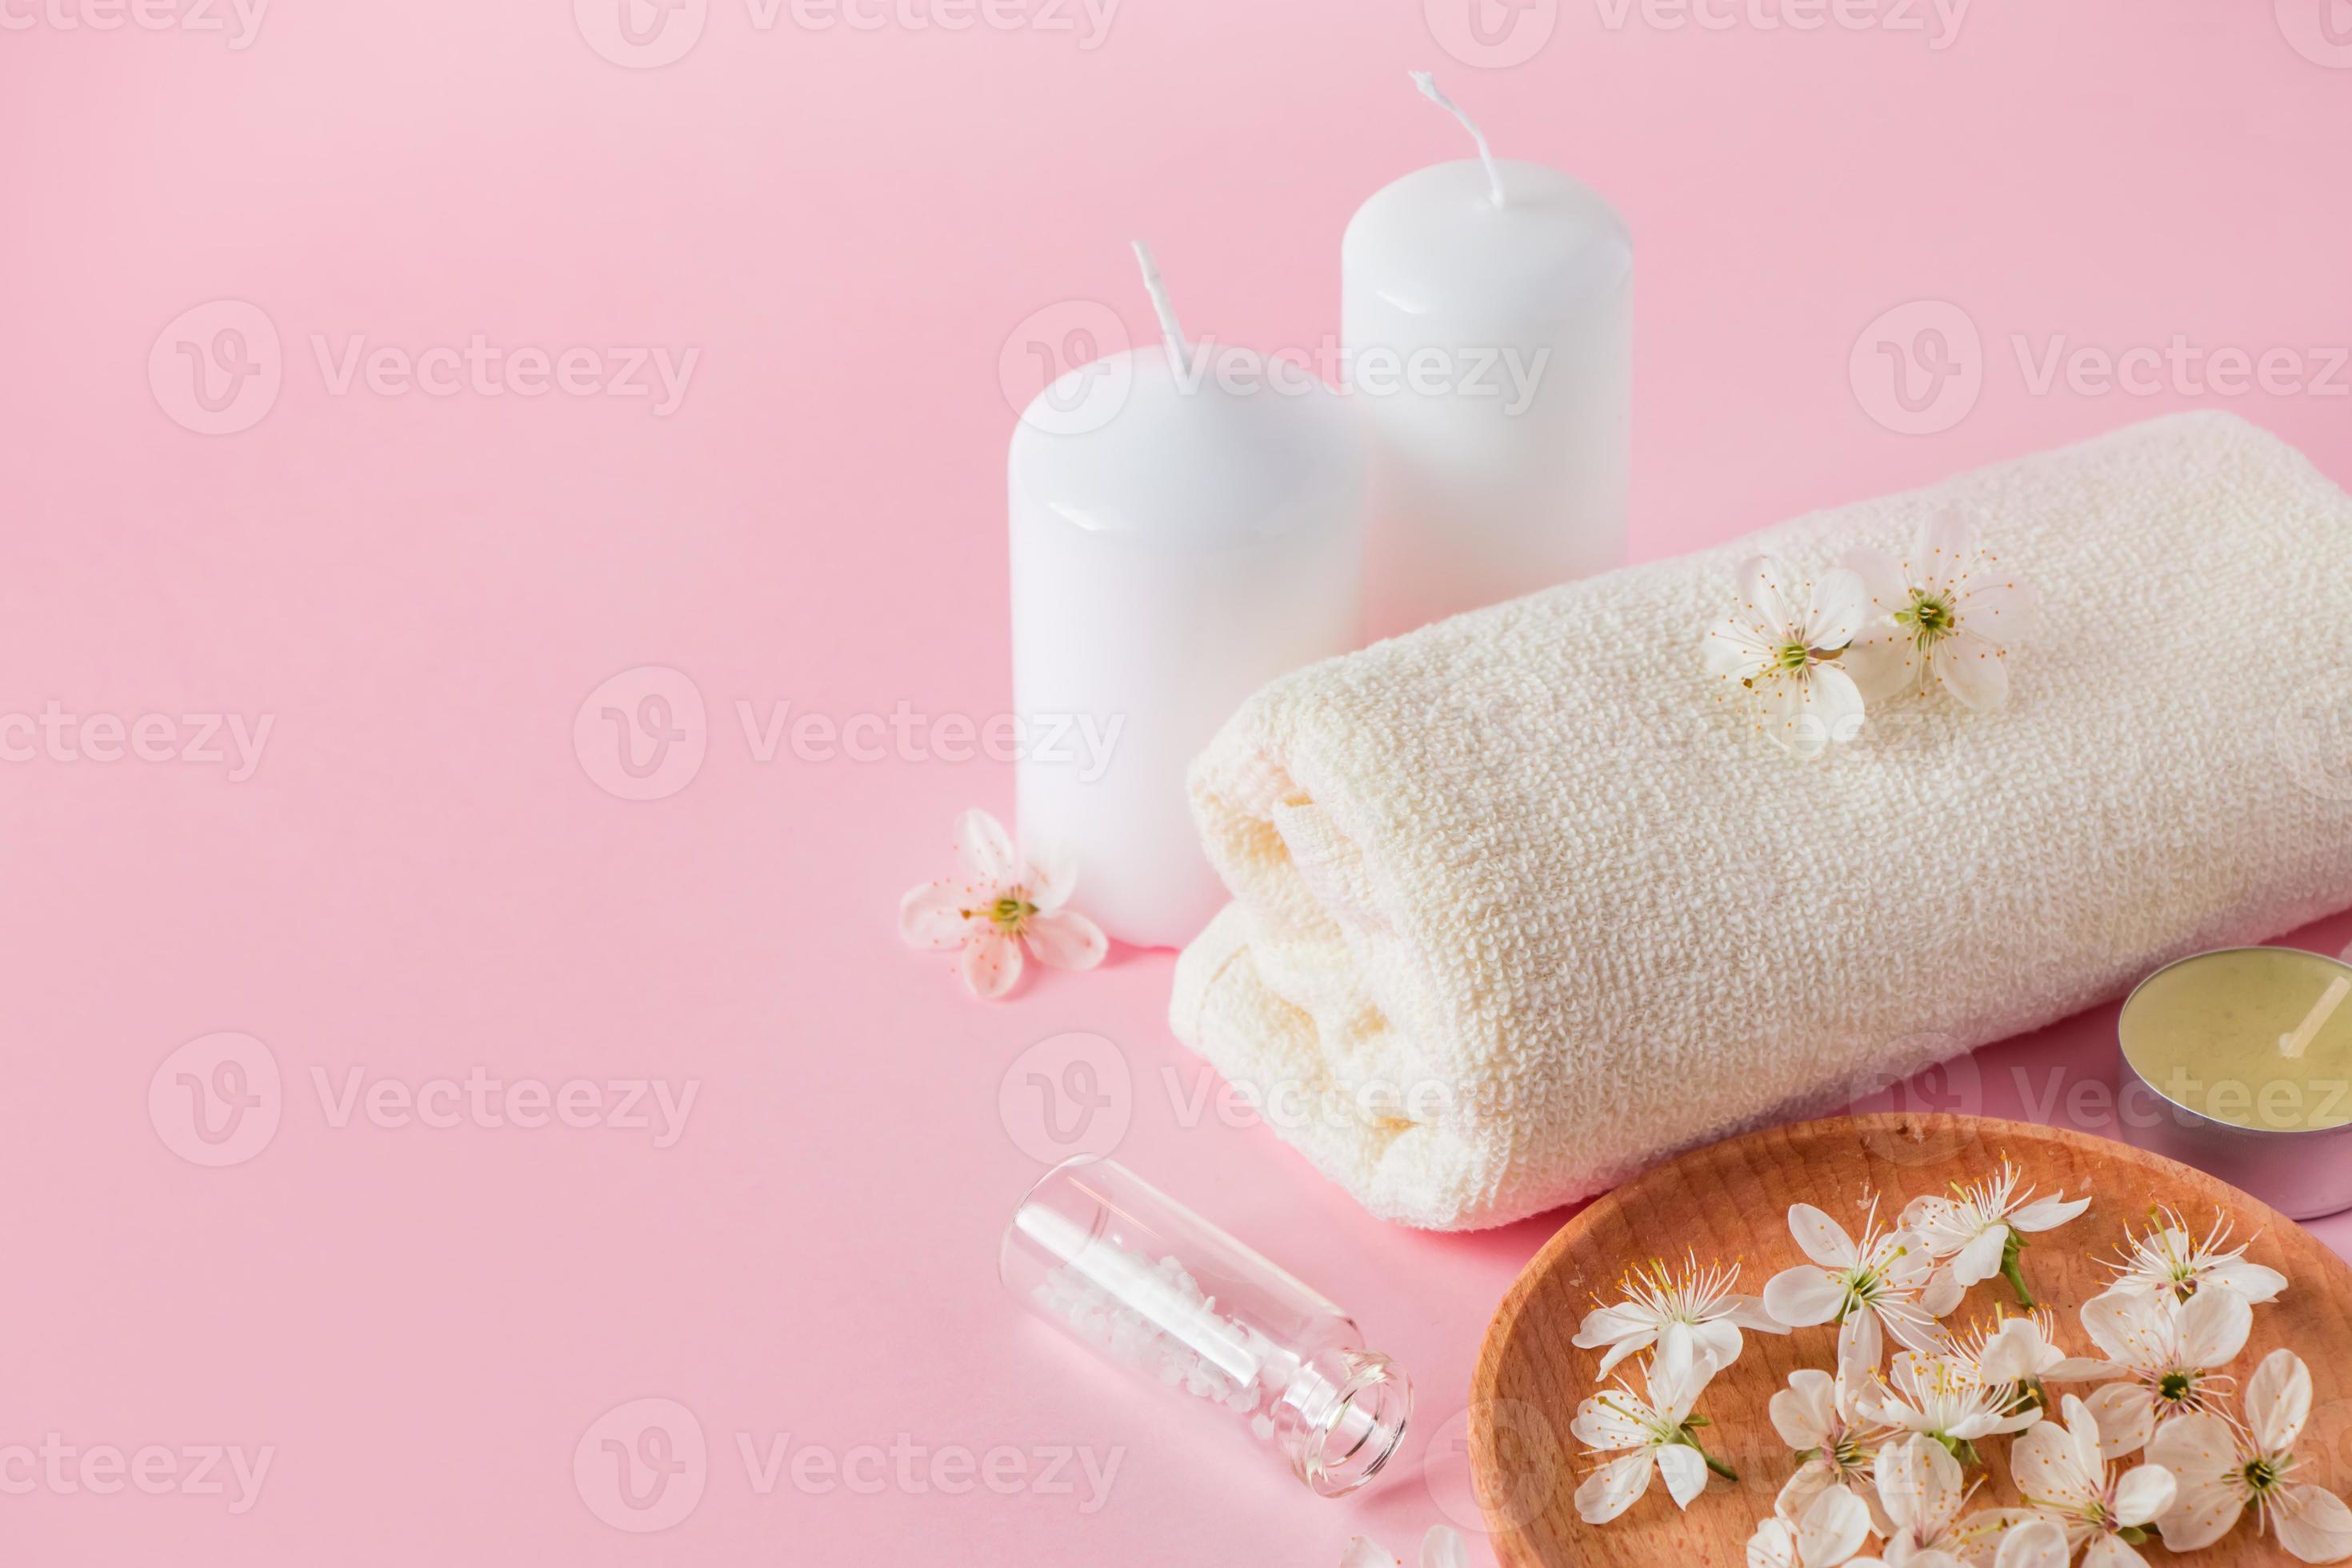 https://static.vecteezy.com/system/resources/previews/003/840/567/large_2x/natural-cosmetic-products-for-spa-and-aromatherapy-relaxation-concept-candles-flowers-and-a-towel-on-a-pink-background-photo.jpg